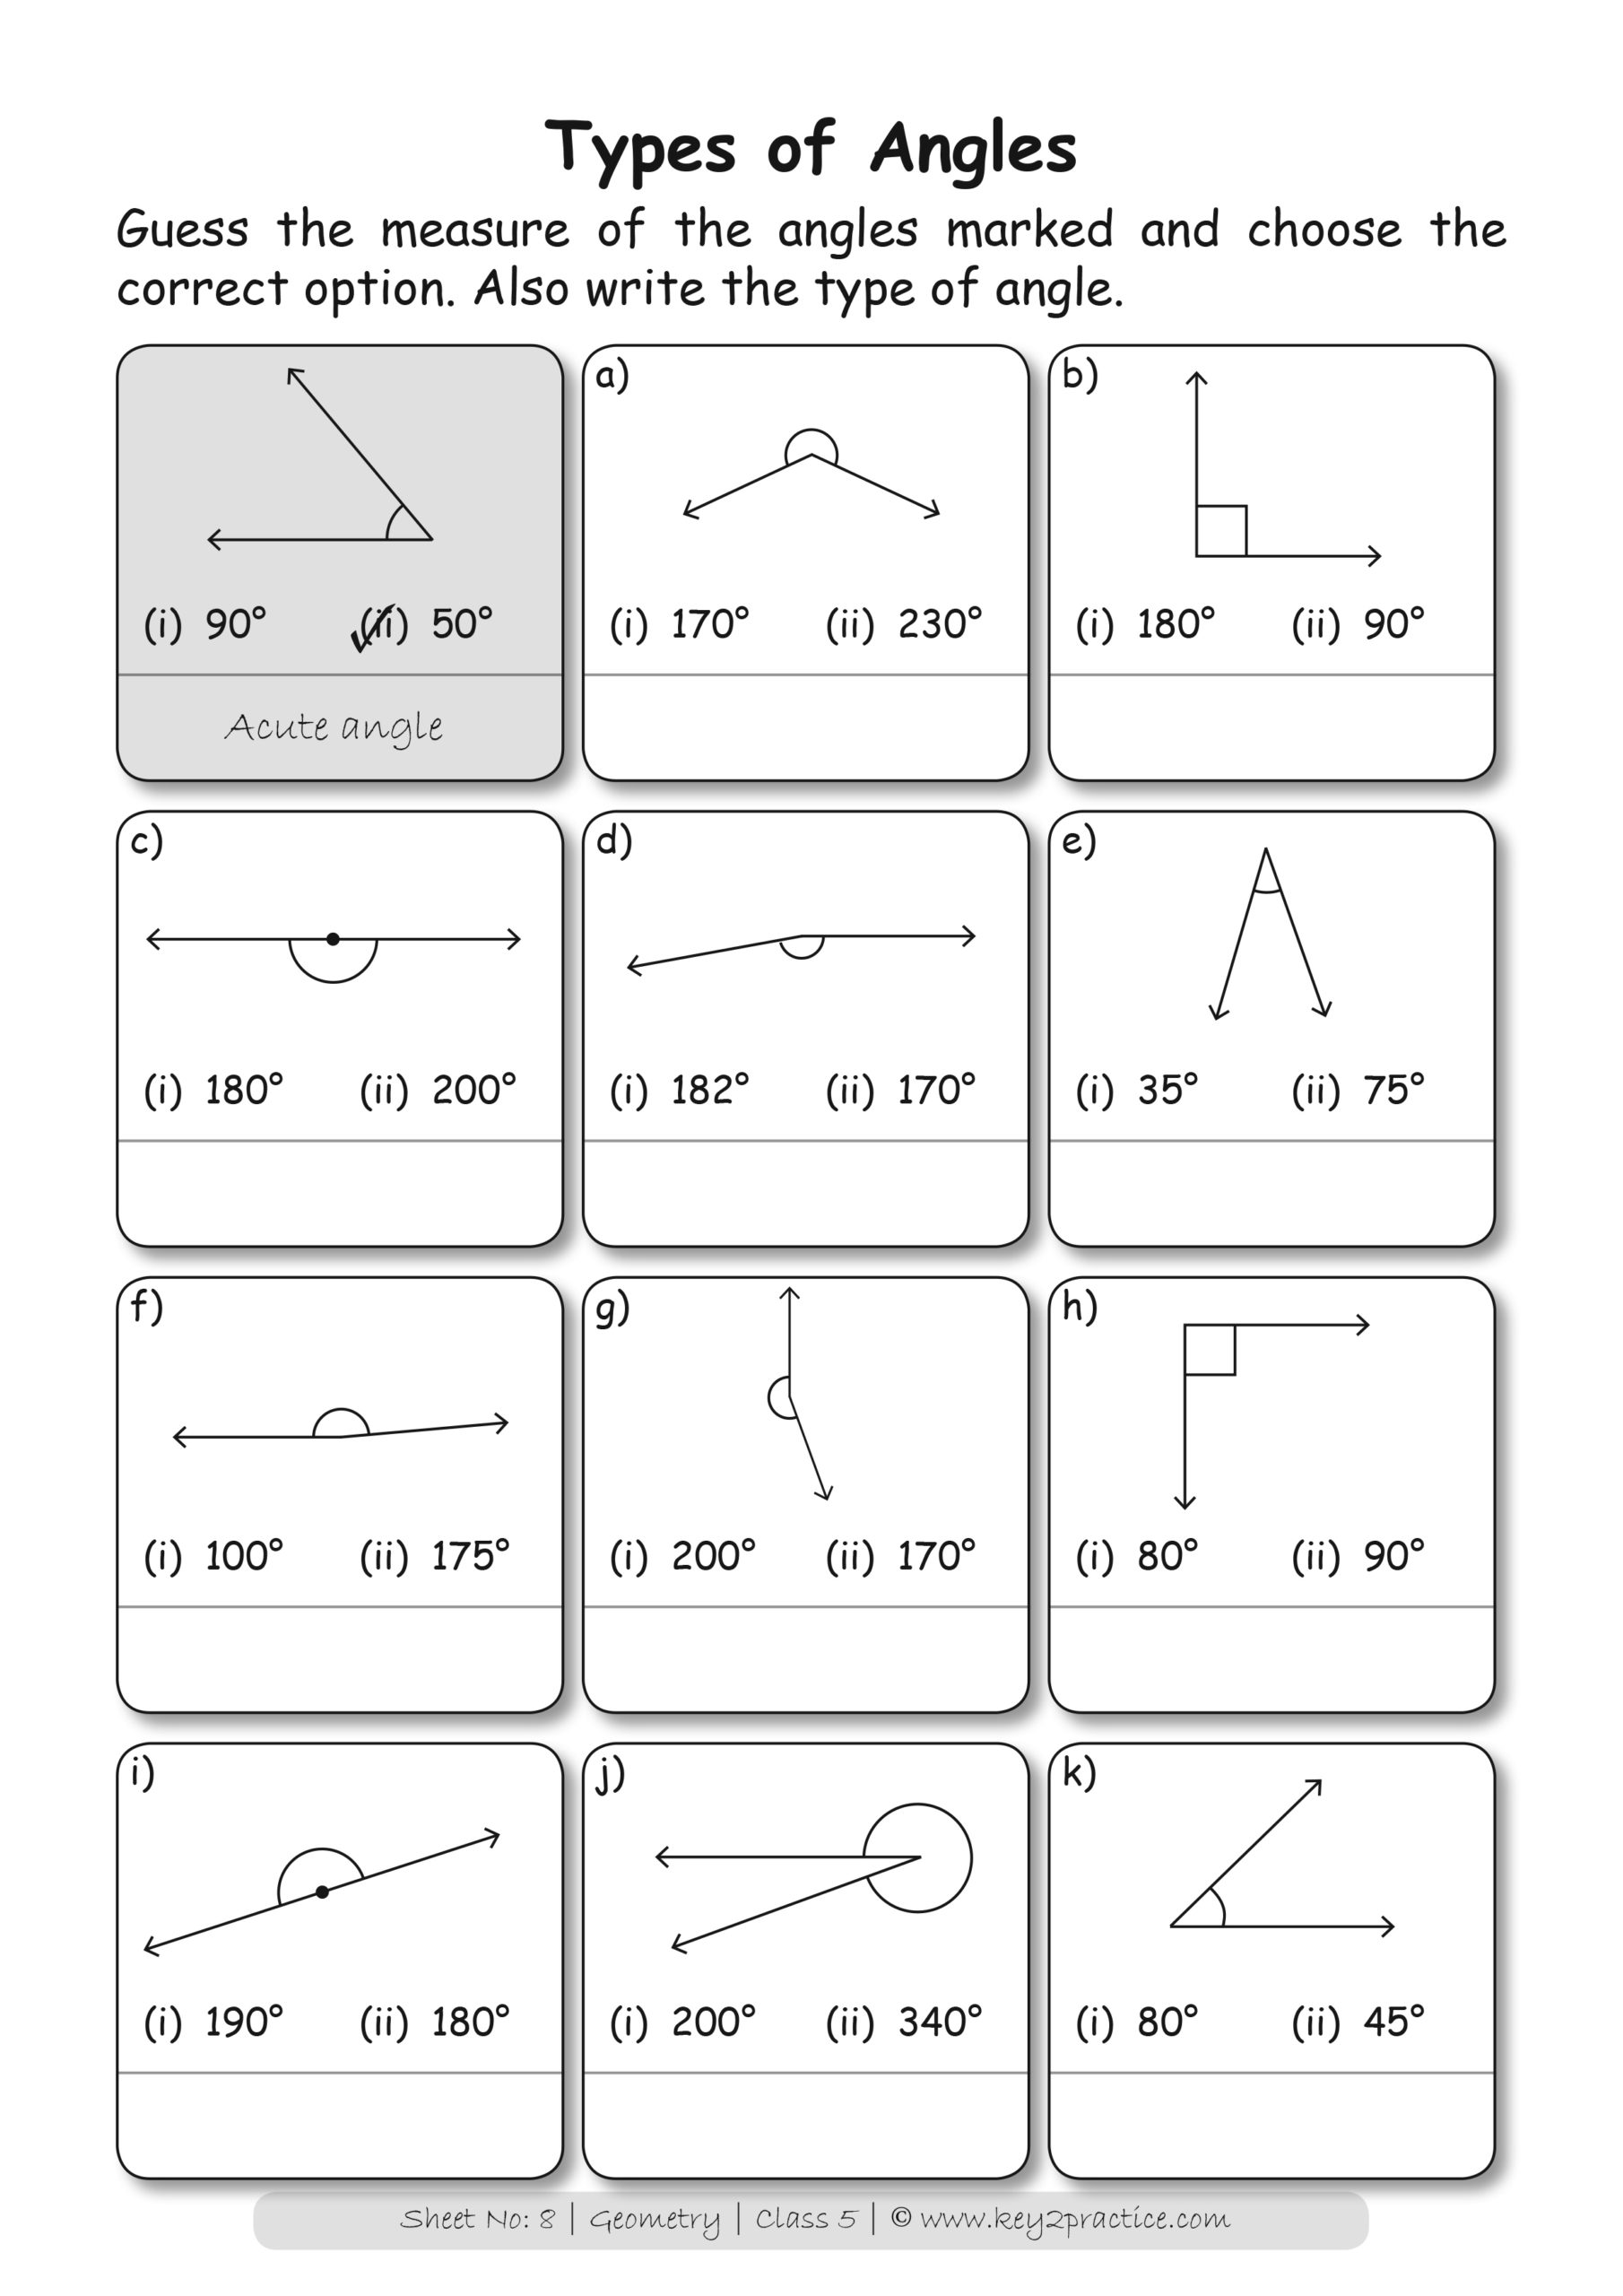 types-of-angles-worksheets